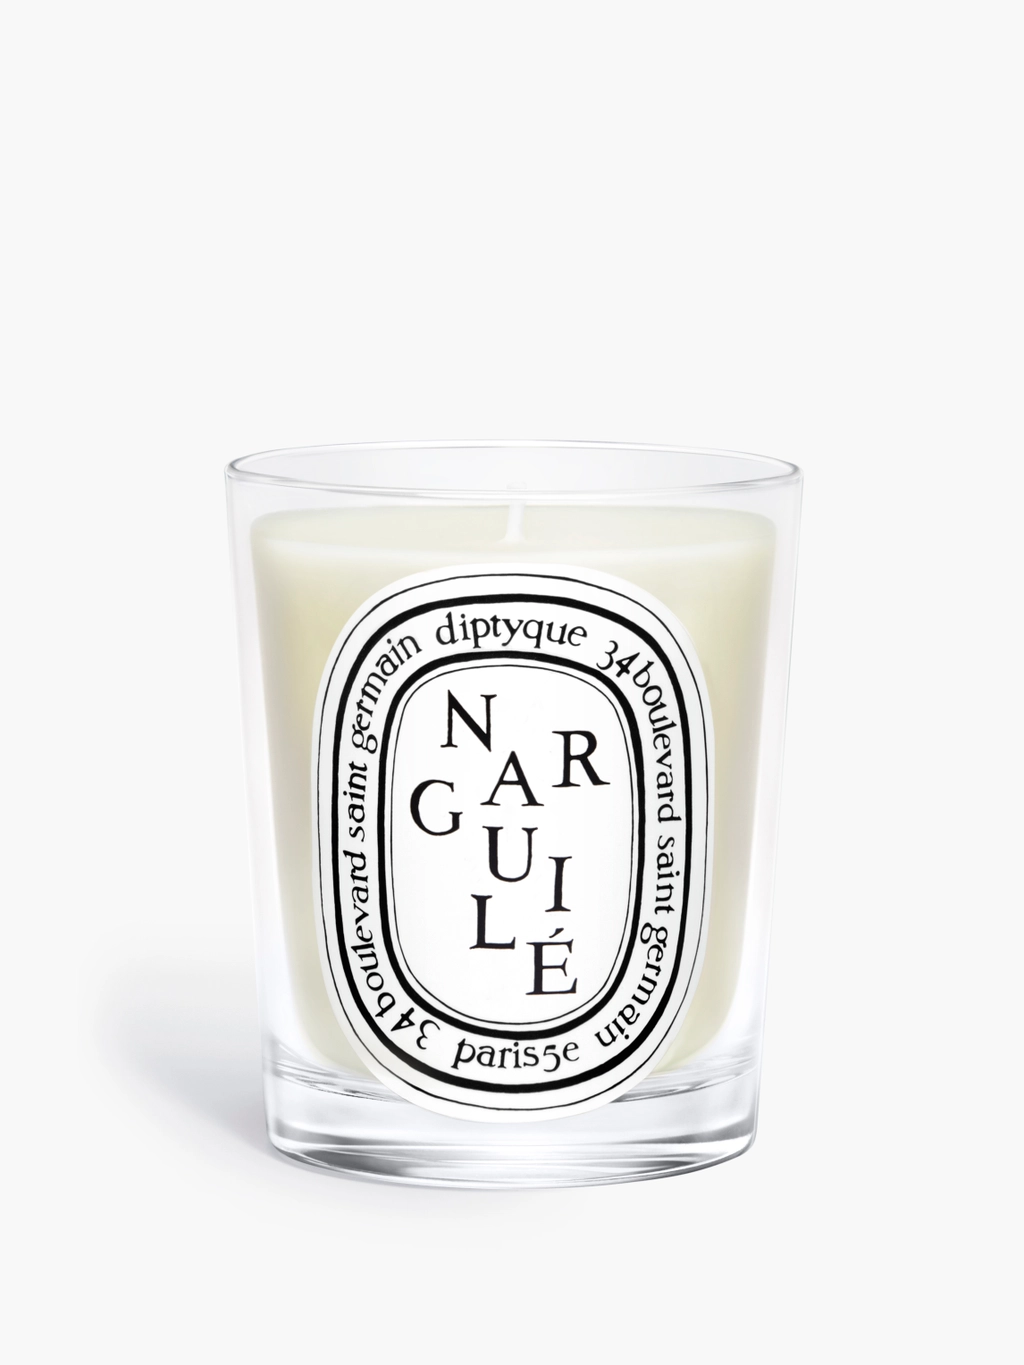 Narguile candle, Diptyque.